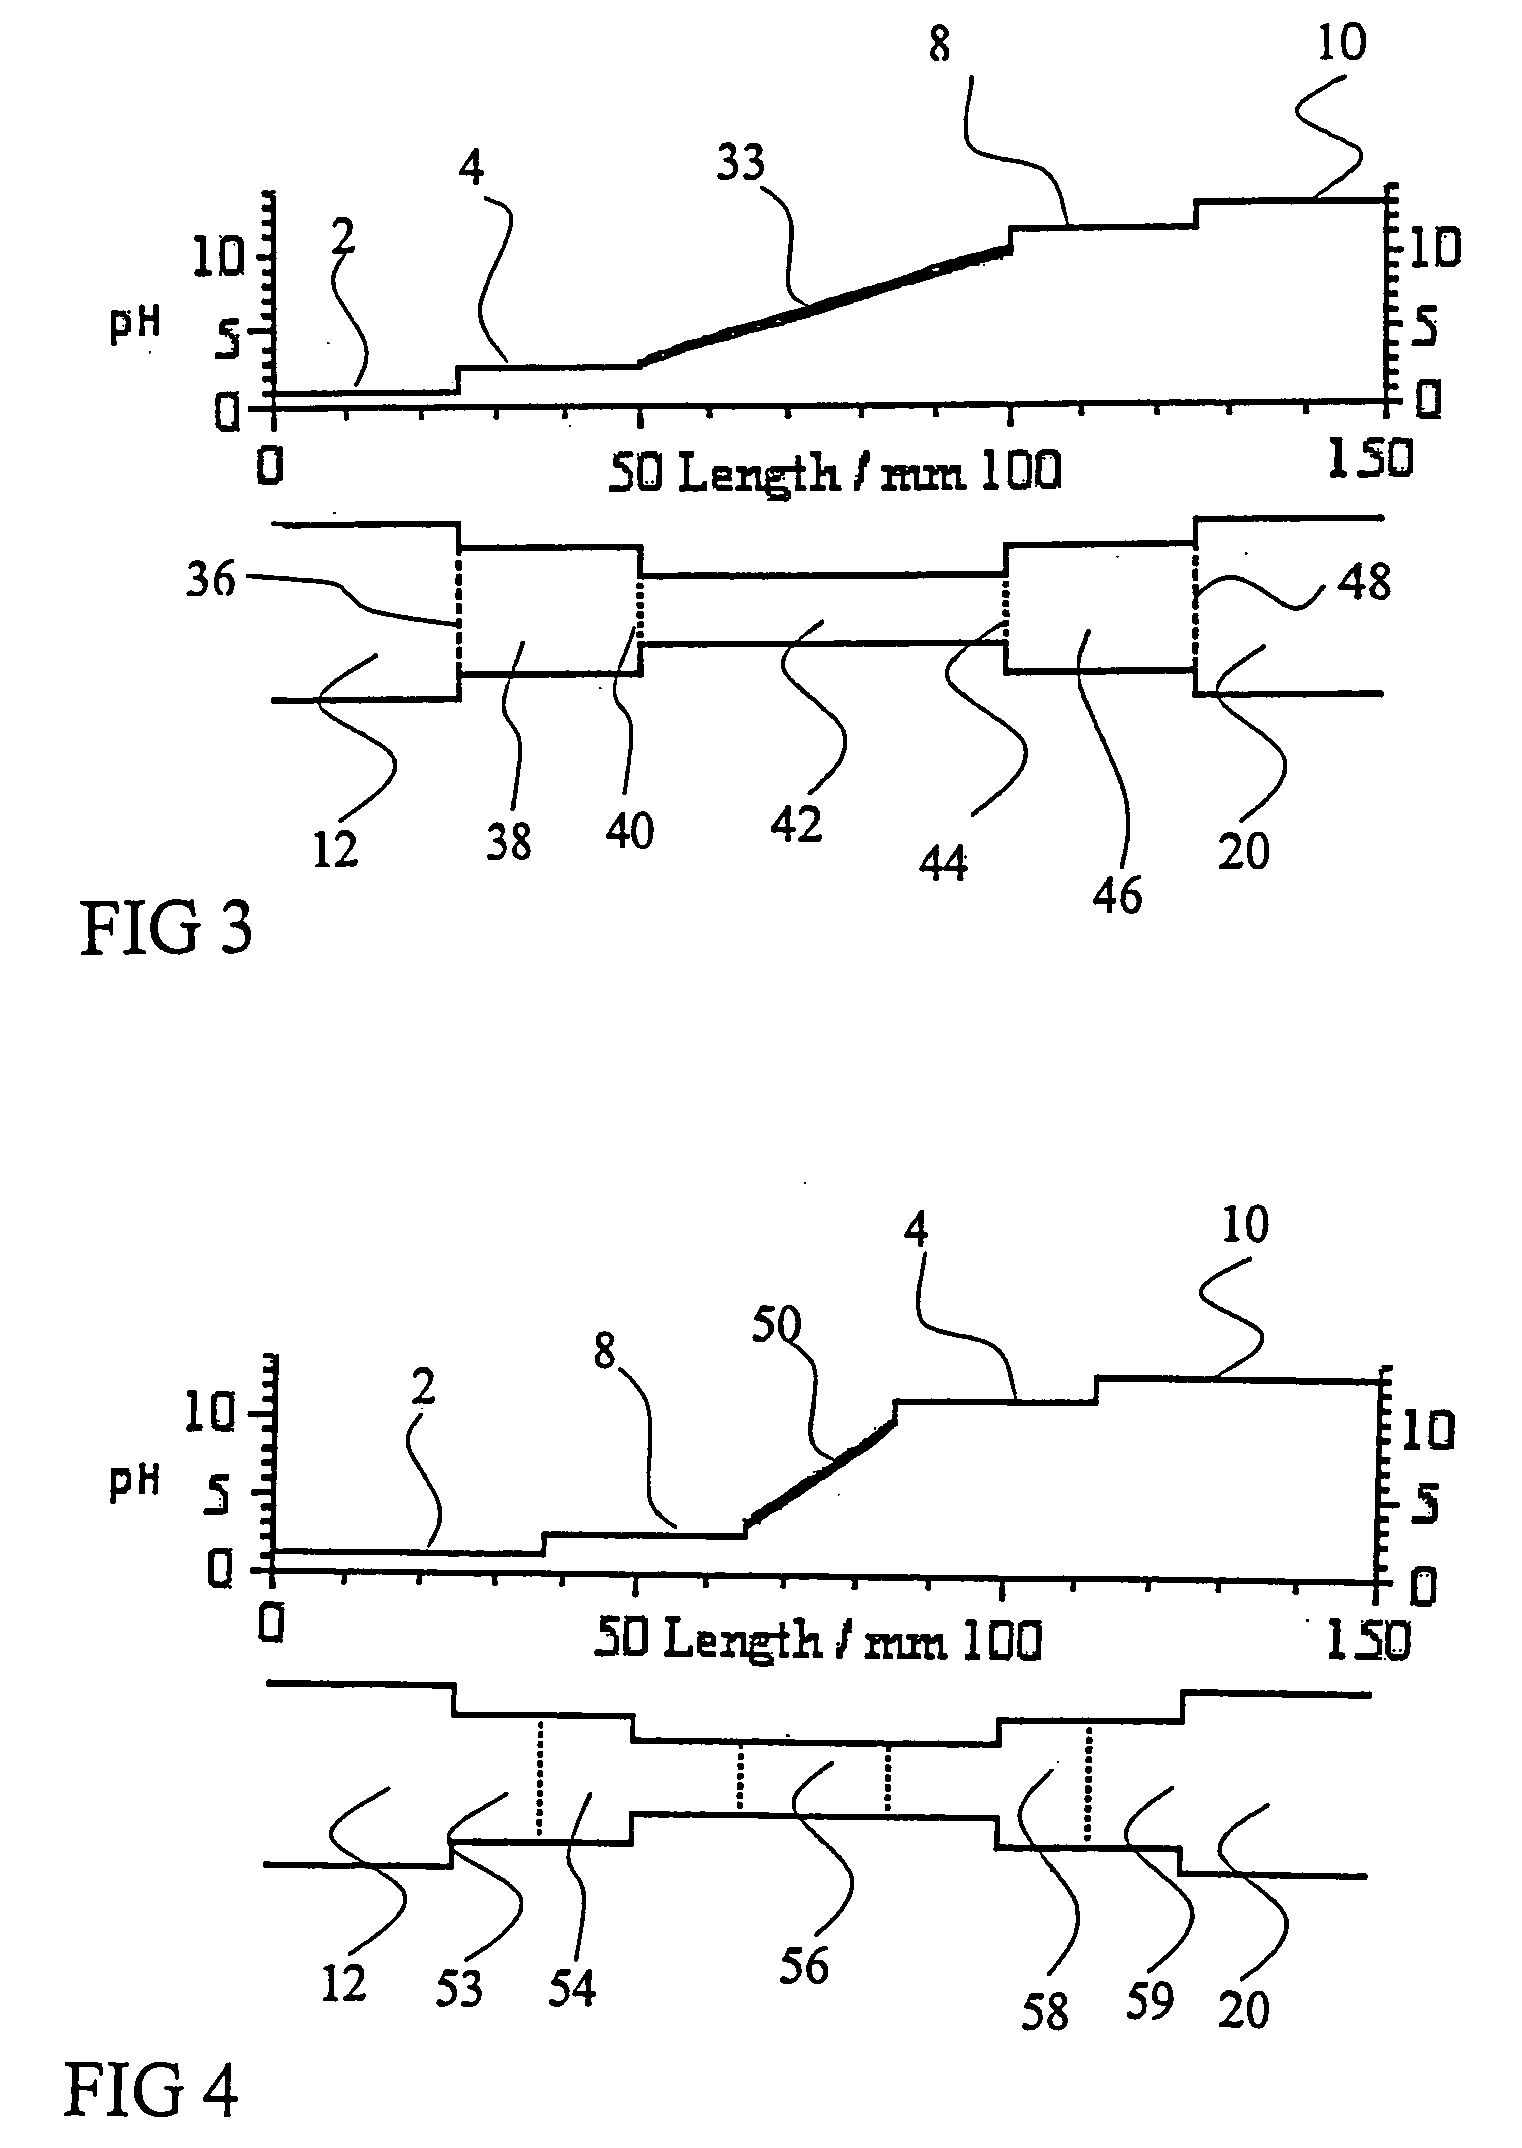 Method and apparatus to improve the concentration detection sensitivity in isoelectric focusing systems